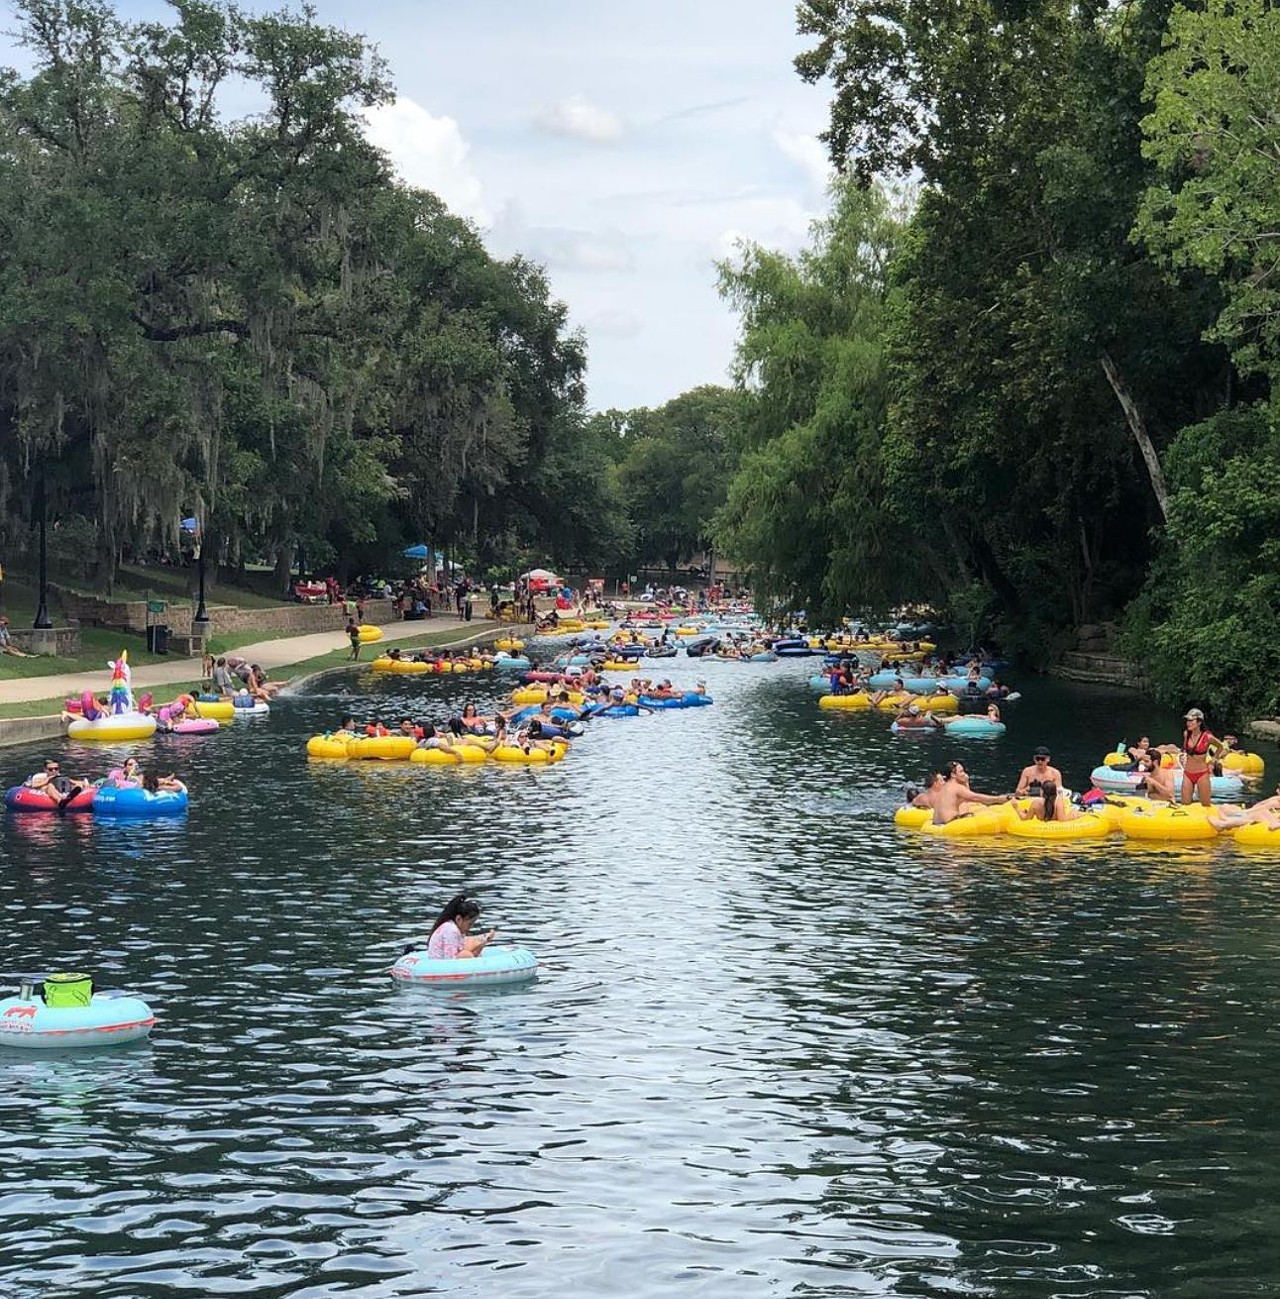 Floating down the Comal
Drunk people littering. Need we say more? There are some things that you shouldn’t do even if you’re drunk – and this is one of them. Maybe once Texans learn how to behave we can revisit this.
Photo via Instagram / vietspanic40